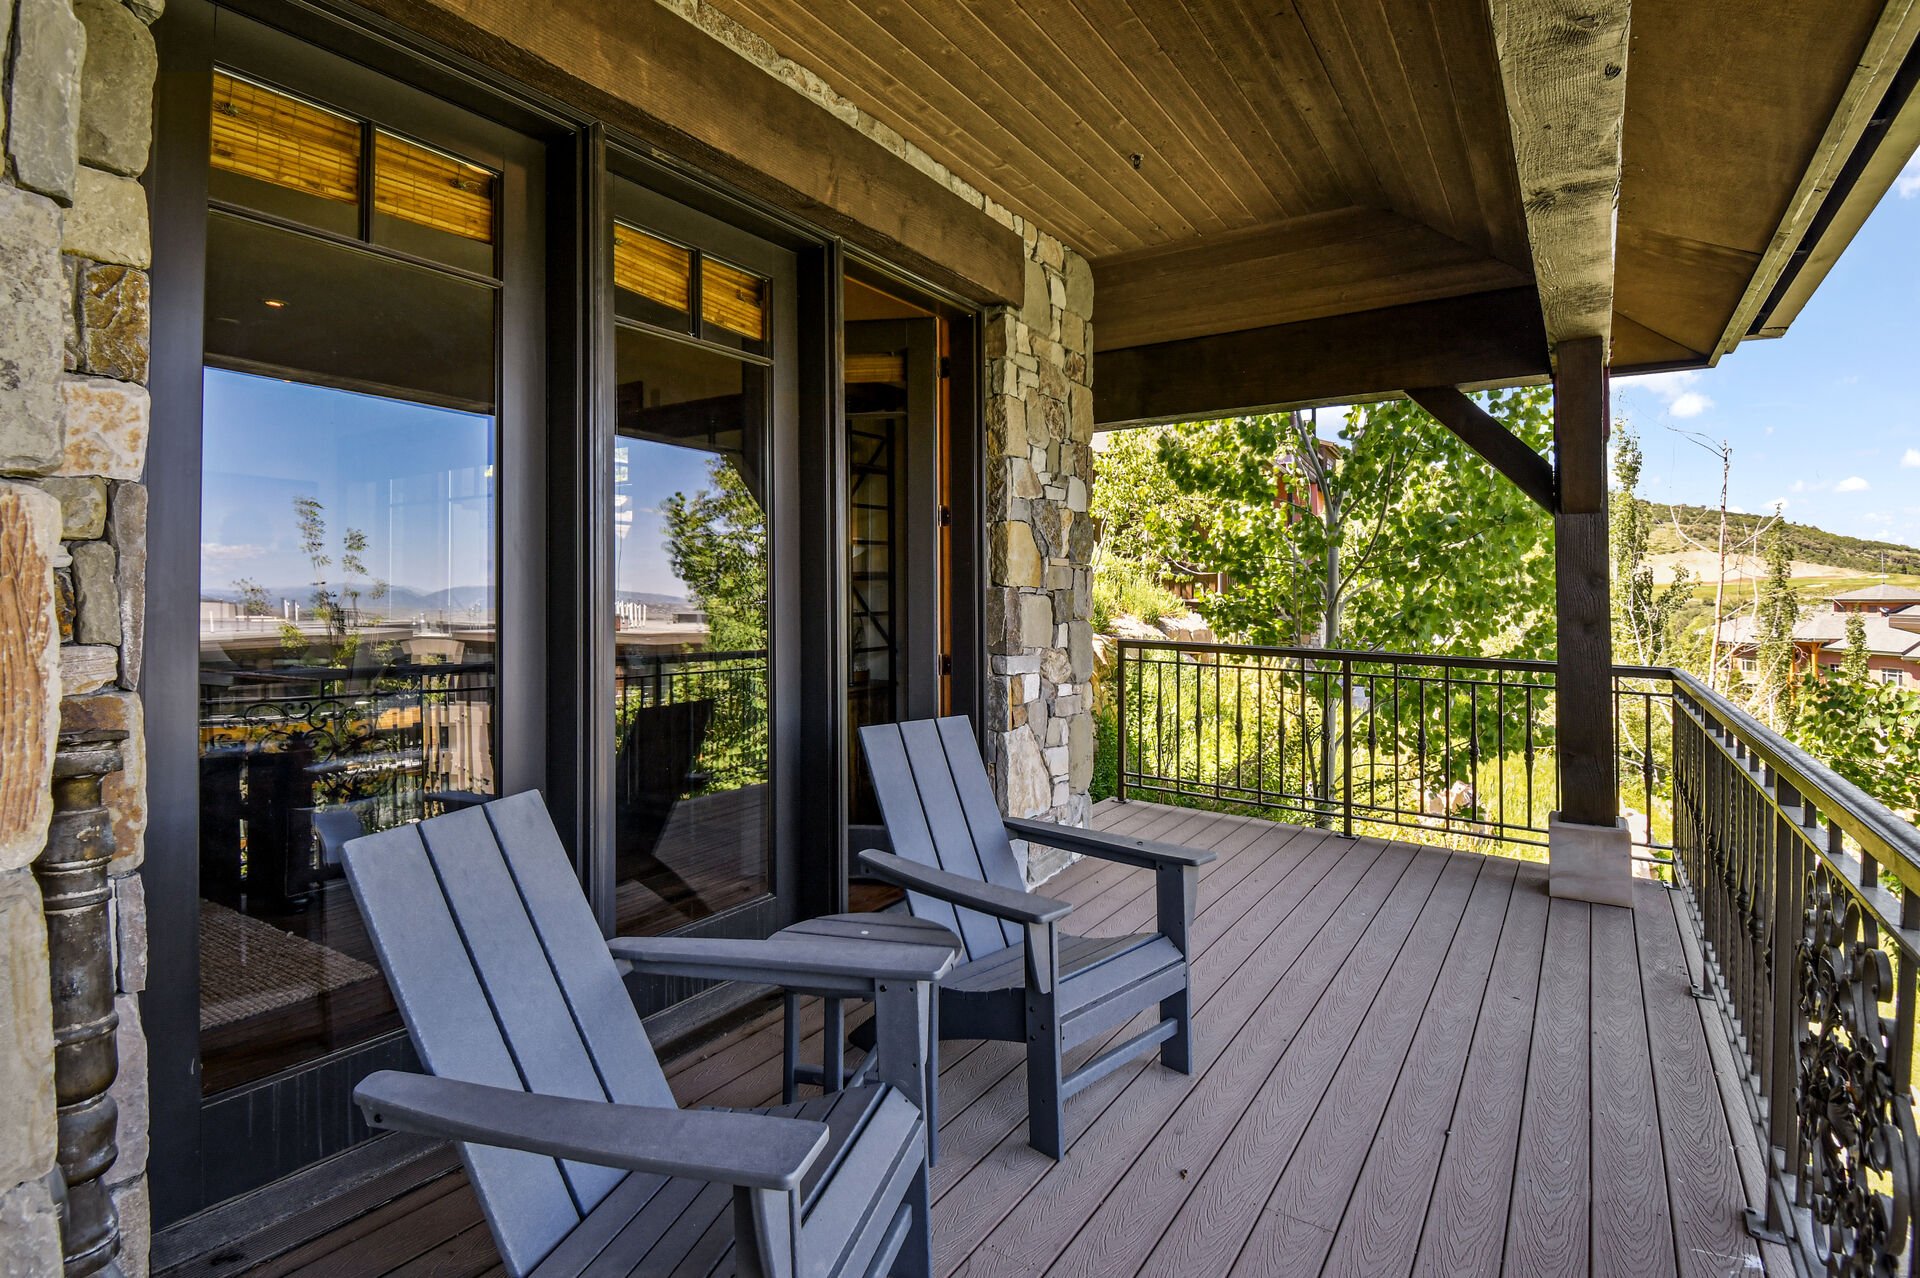 Patio with views across to the Uinta mountains with chairs